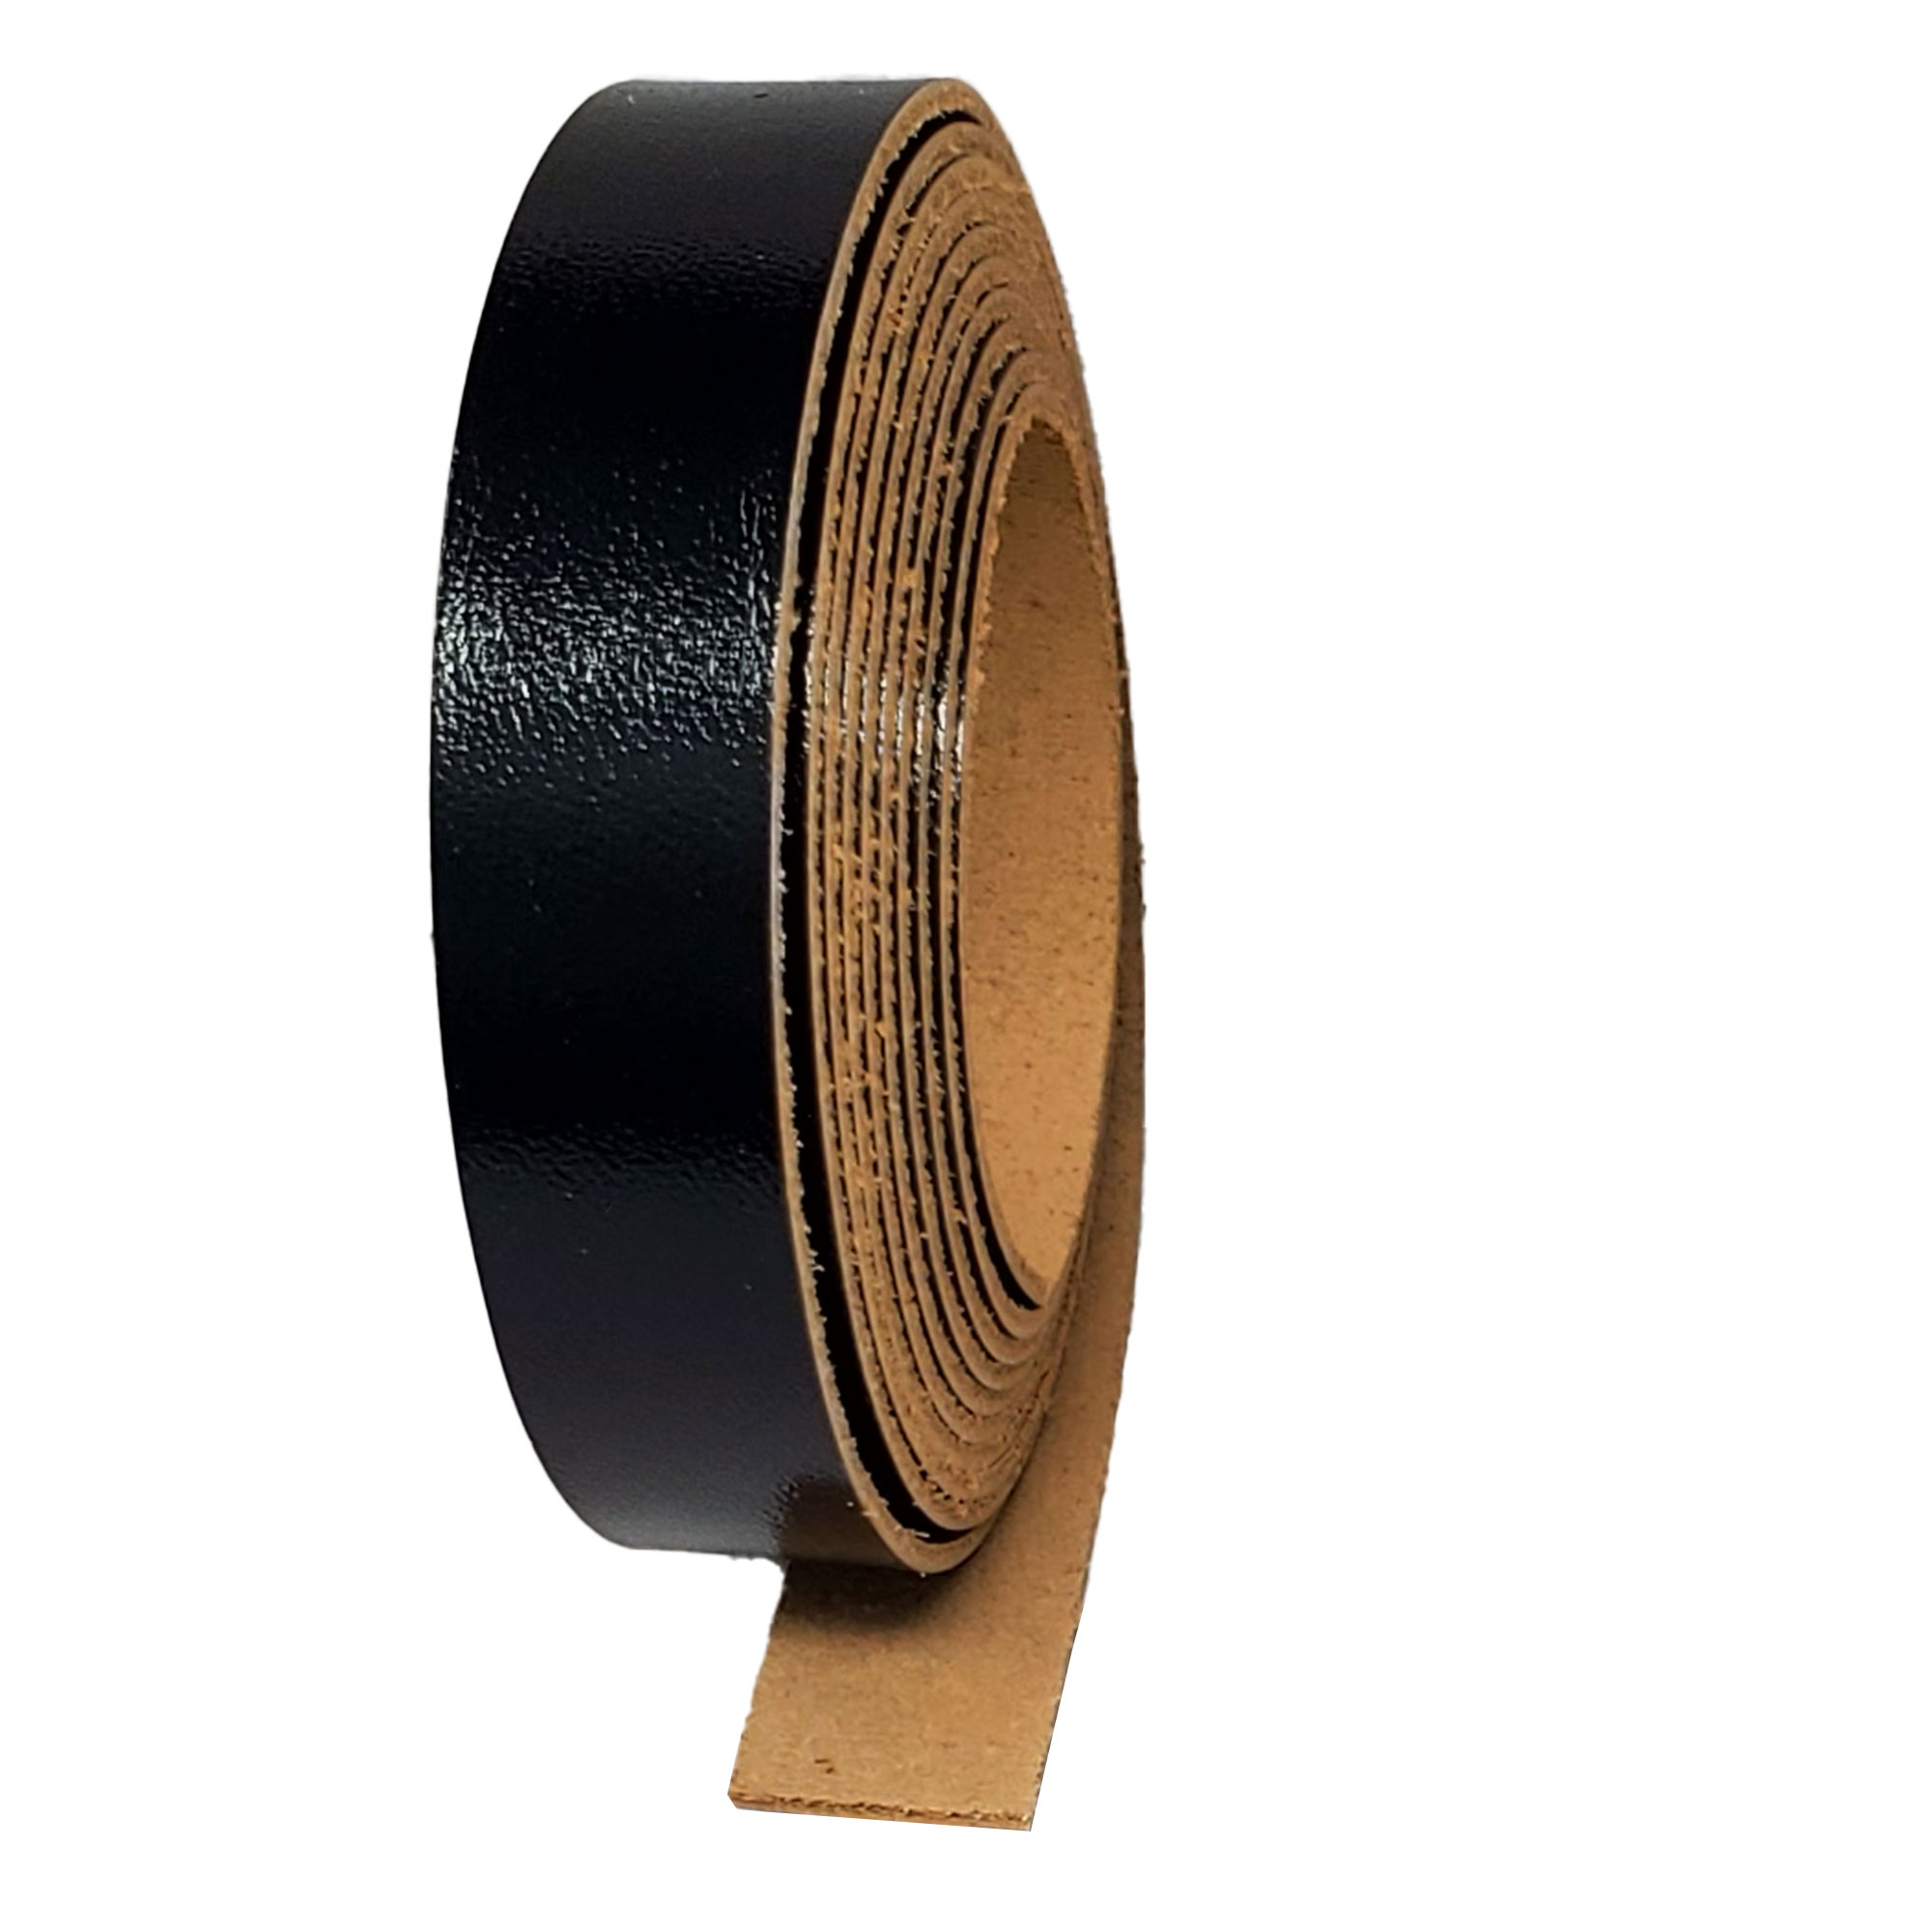 Leather Strips 5/8 Inch Wide - Full Grain Cow Leather Metallic Strips